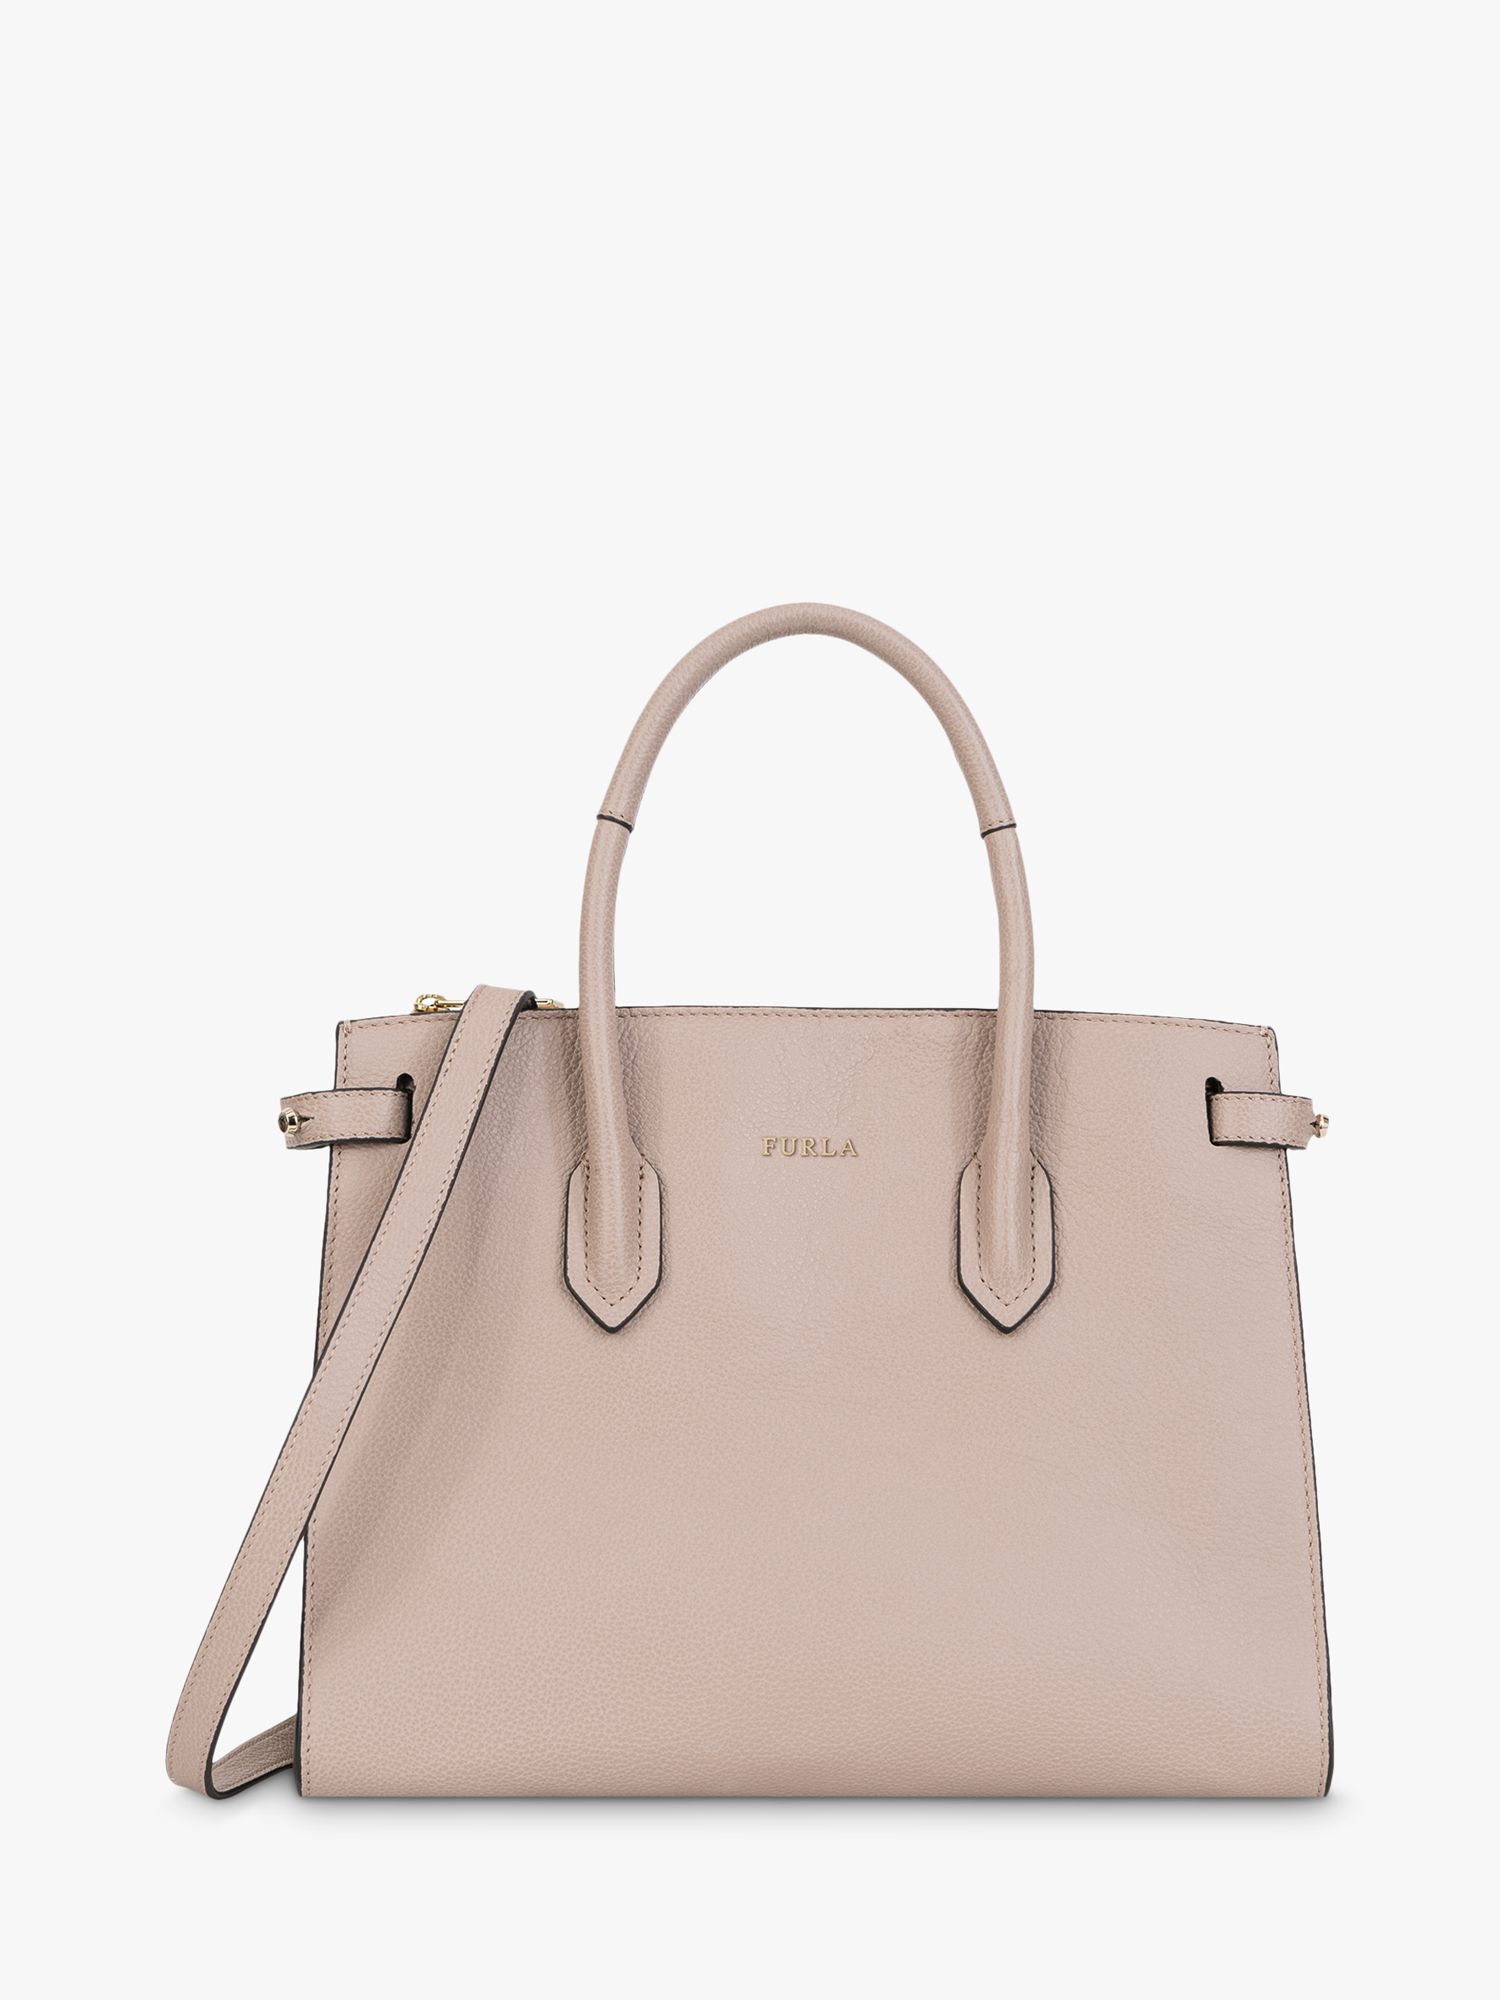 Furla Pin Small Leather East West Tote Bag